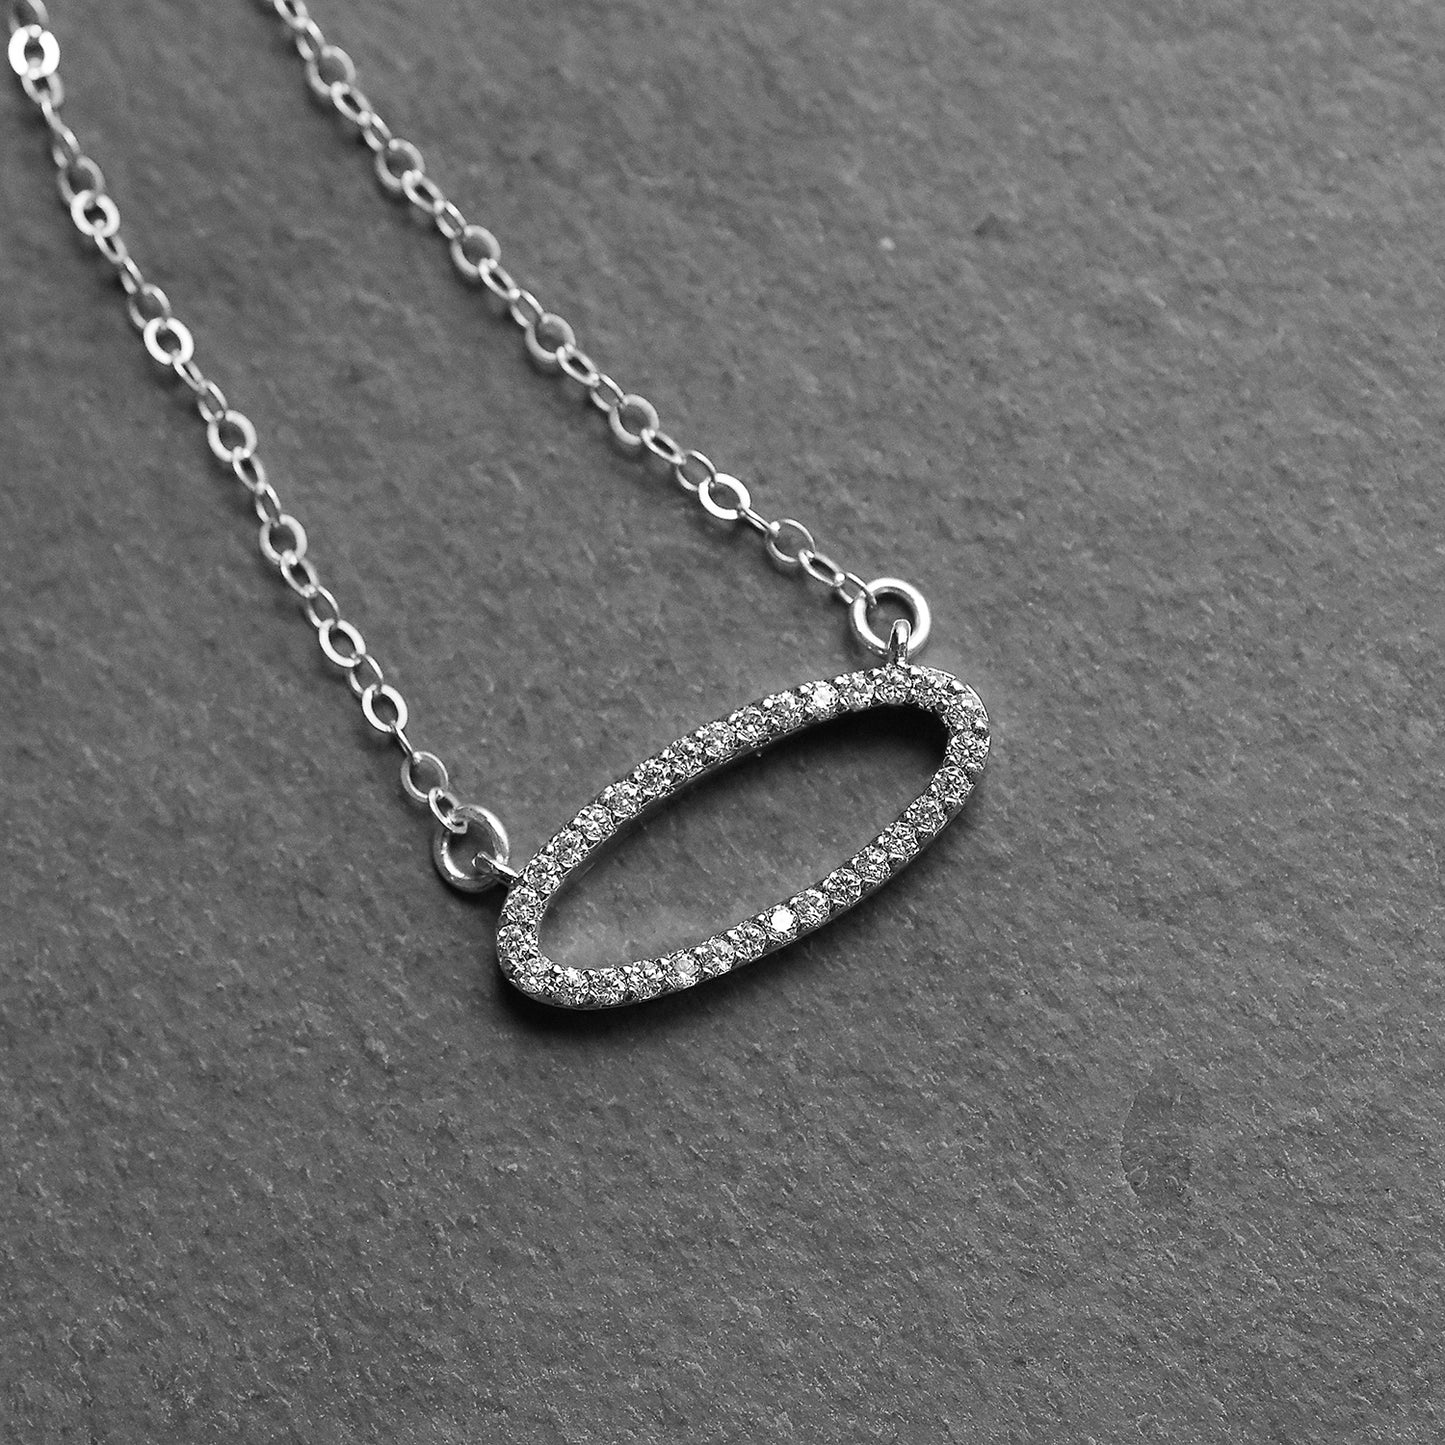 Sparkly Silver Oval Necklace